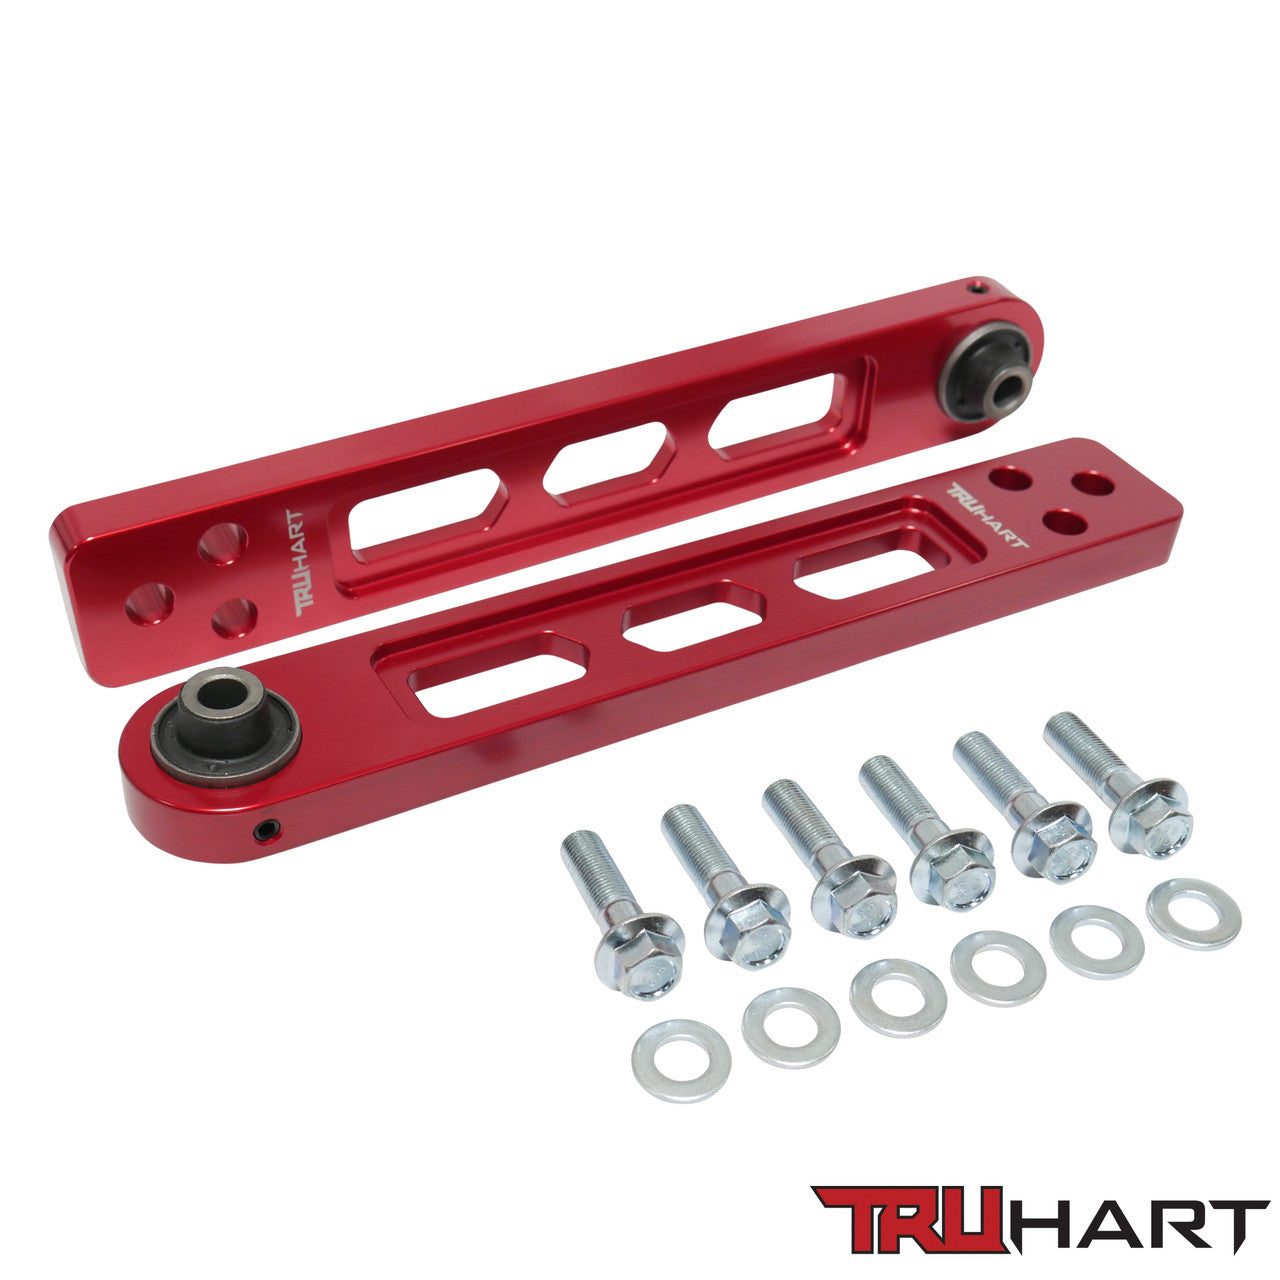 TruHart - Rear Lower Control Arms for 01-05 Civic